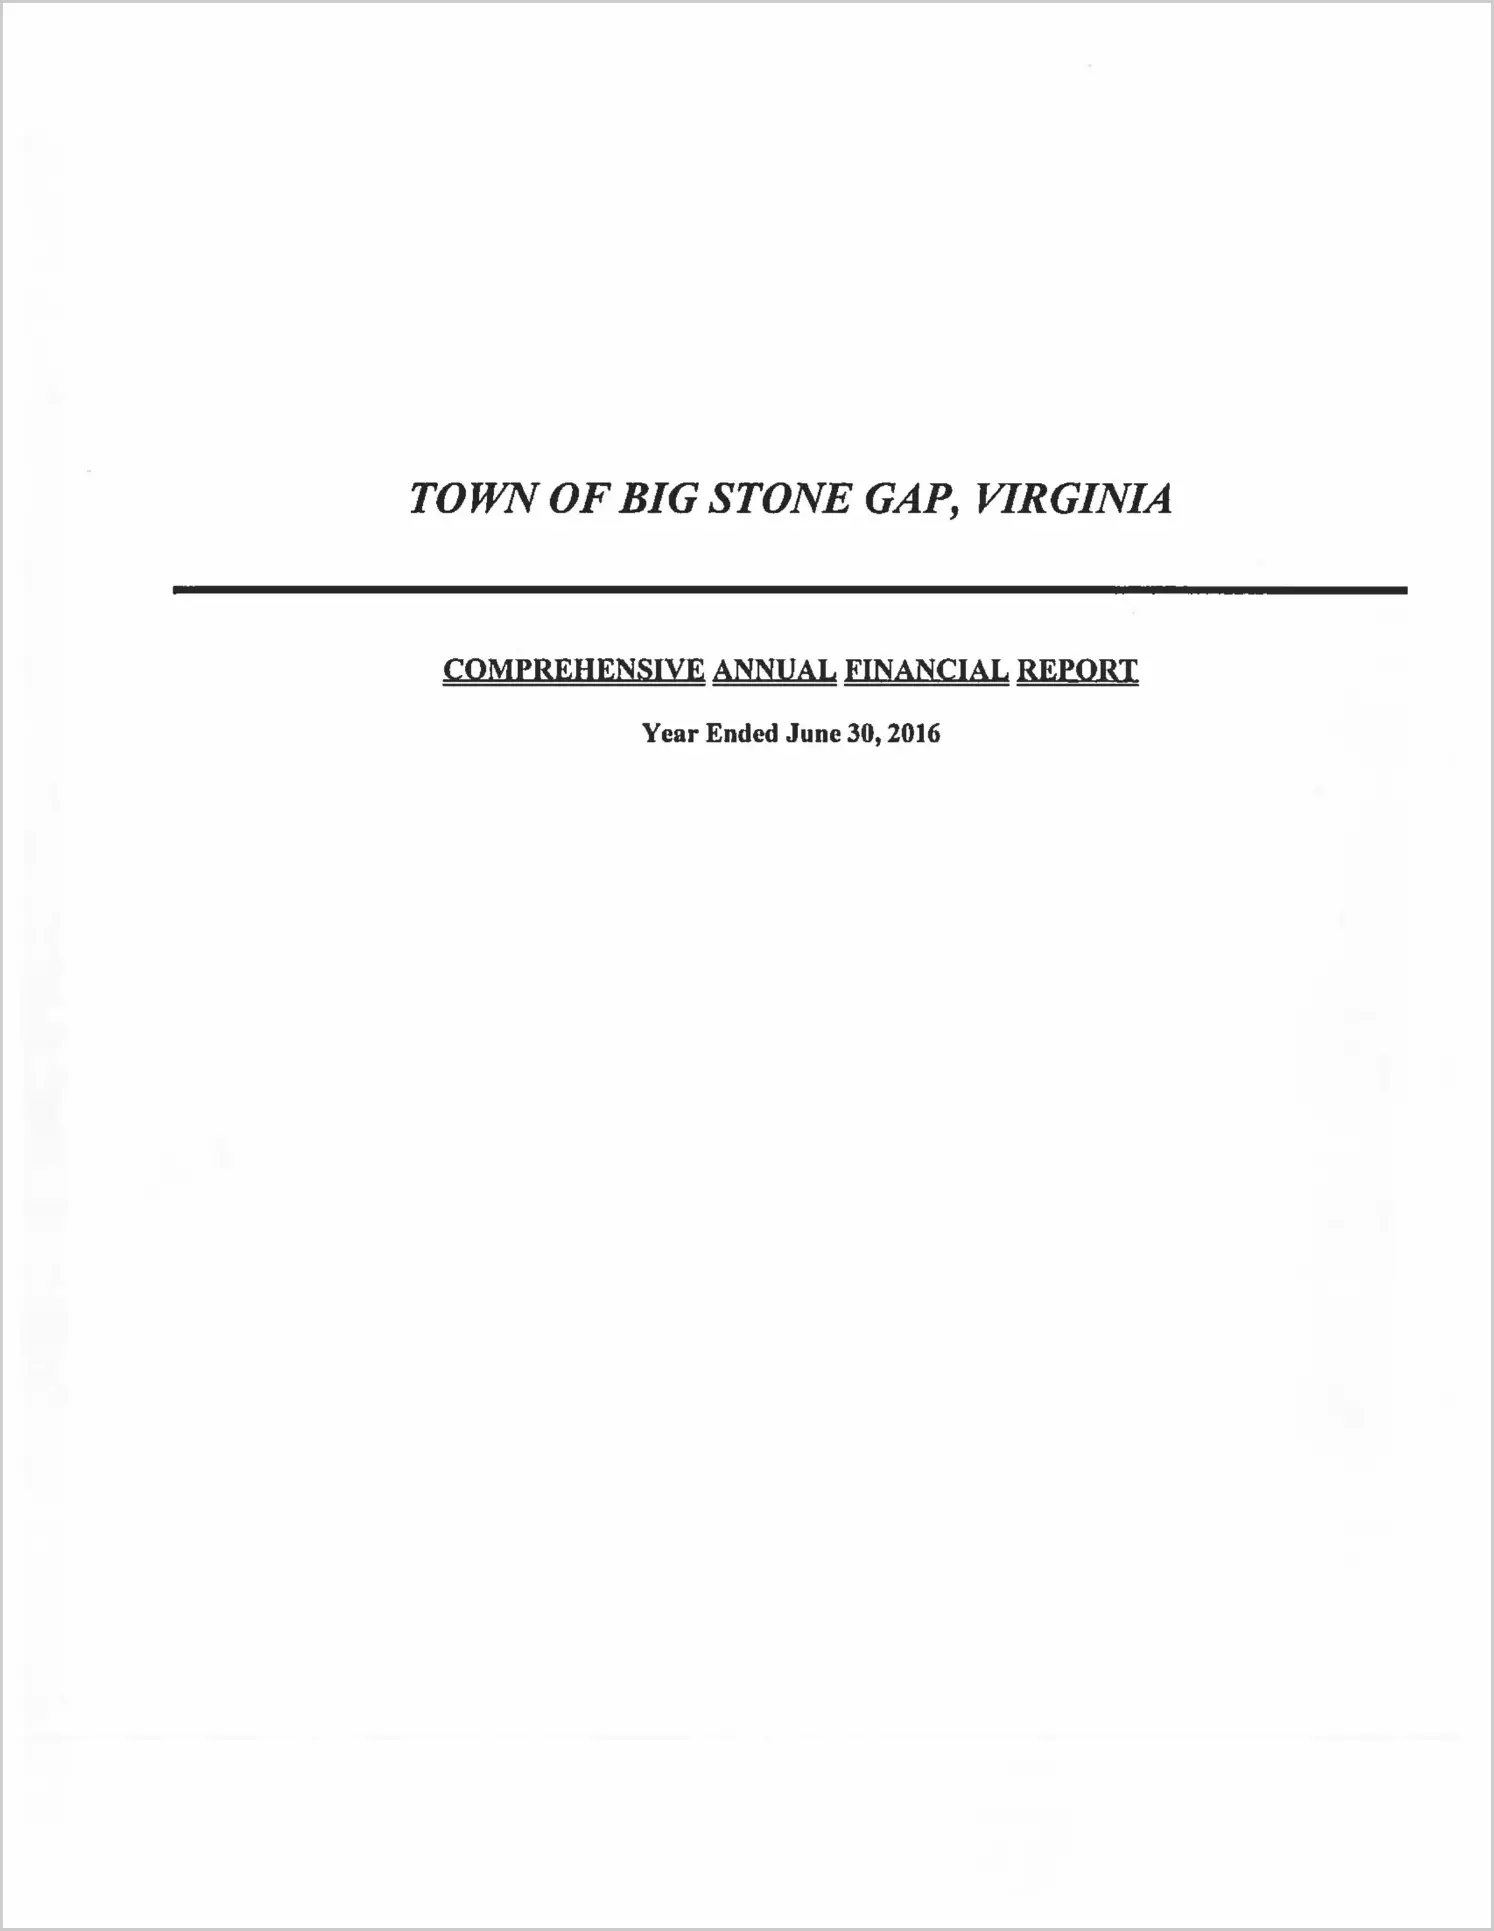 2016 Annual Financial Report for Town of Big Stone Gap